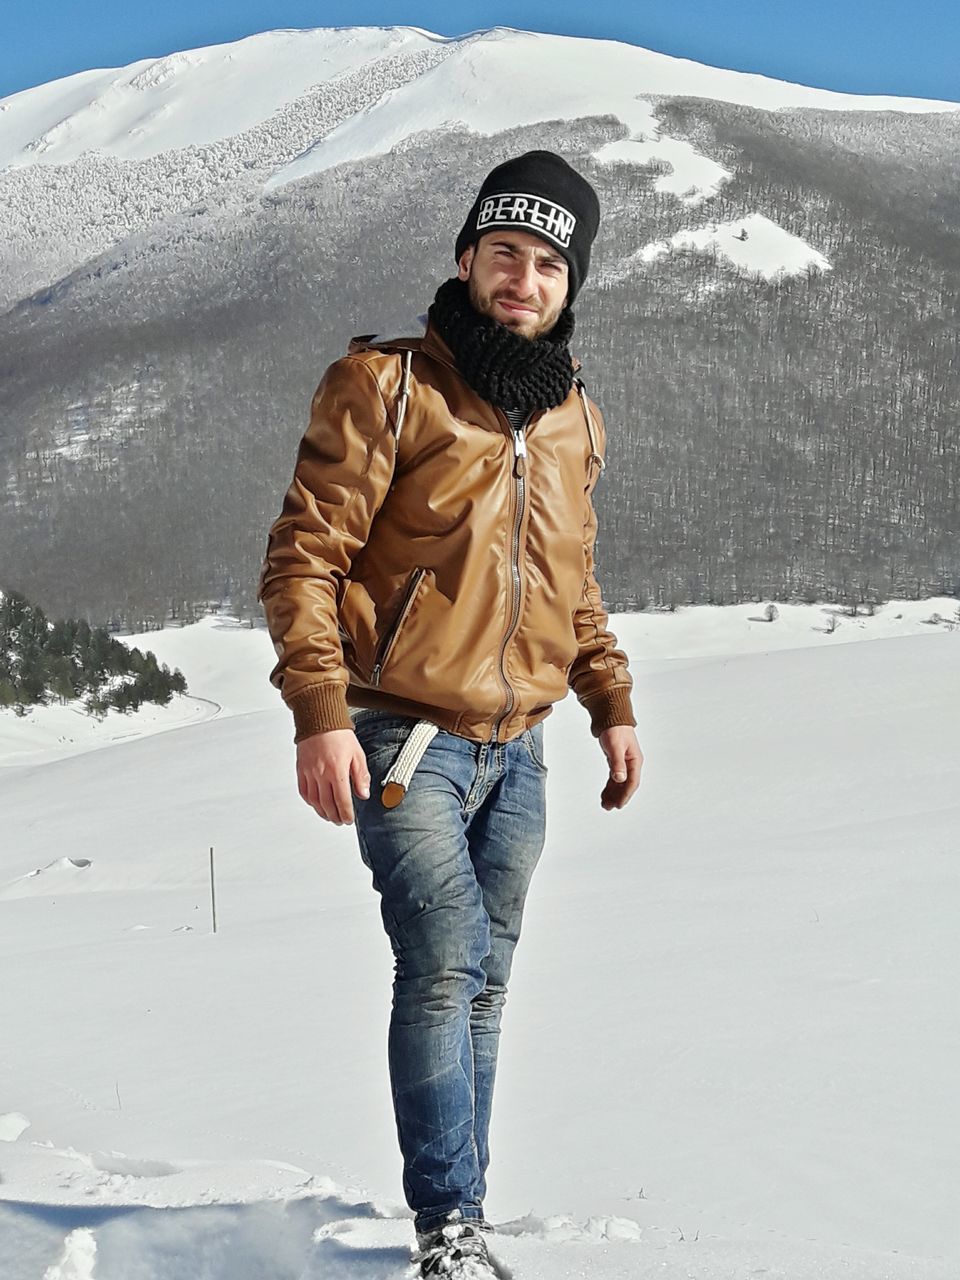 FULL LENGTH PORTRAIT OF A MAN STANDING ON SNOW